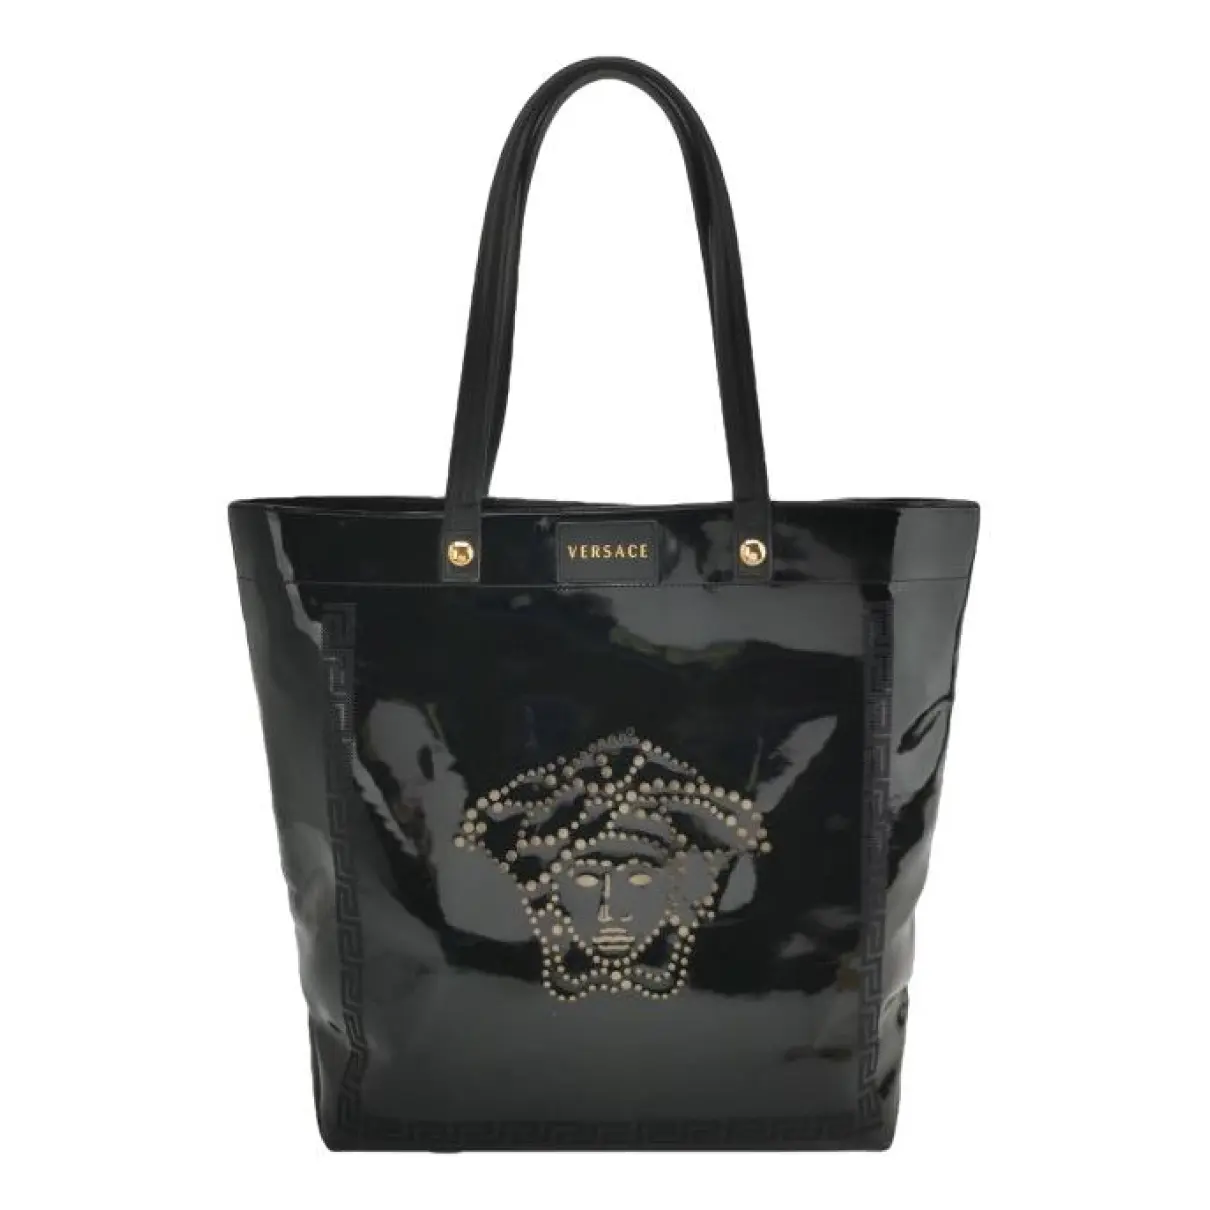 Patent leather tote Versace